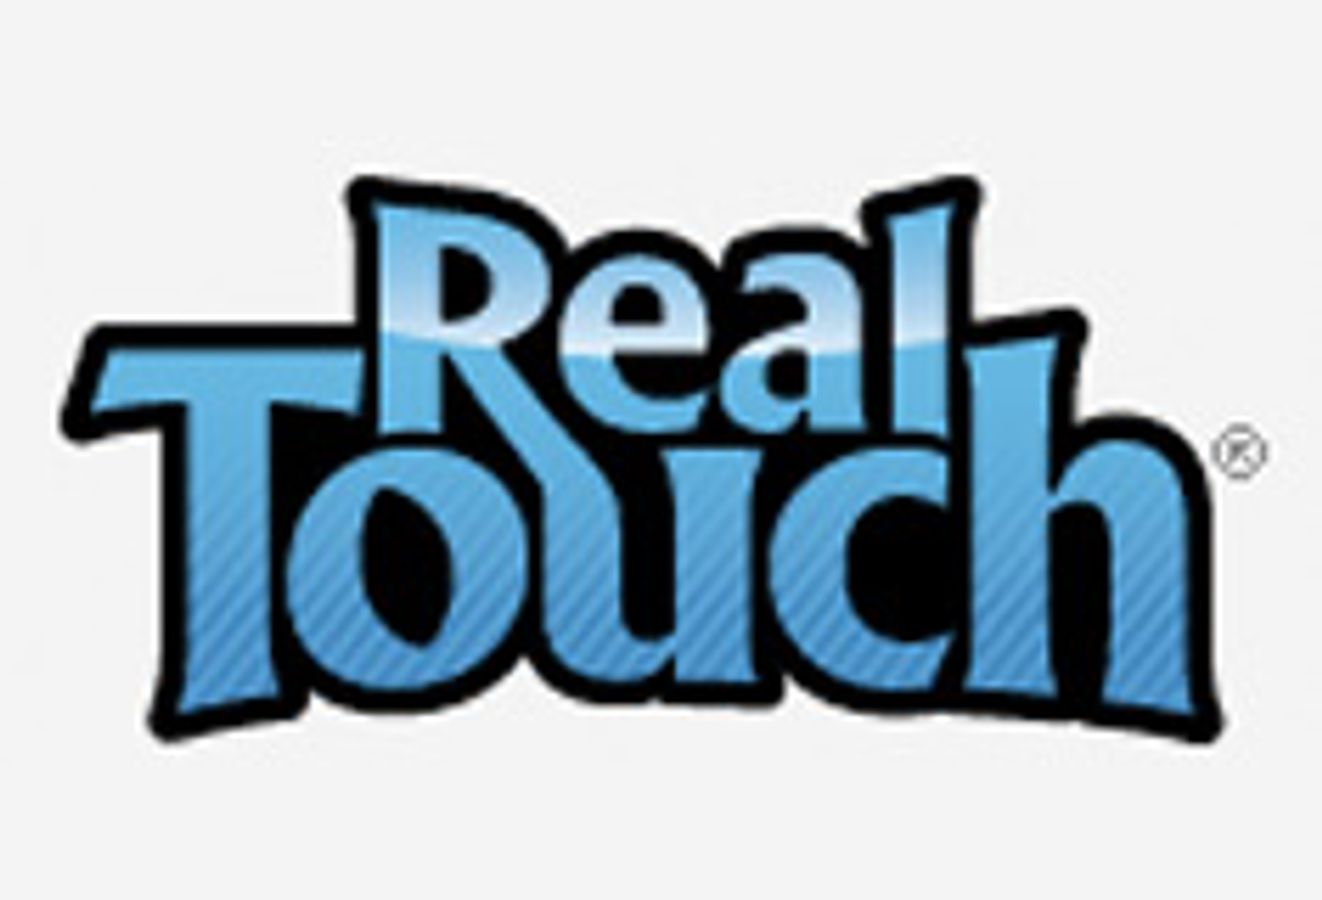 Real Touch